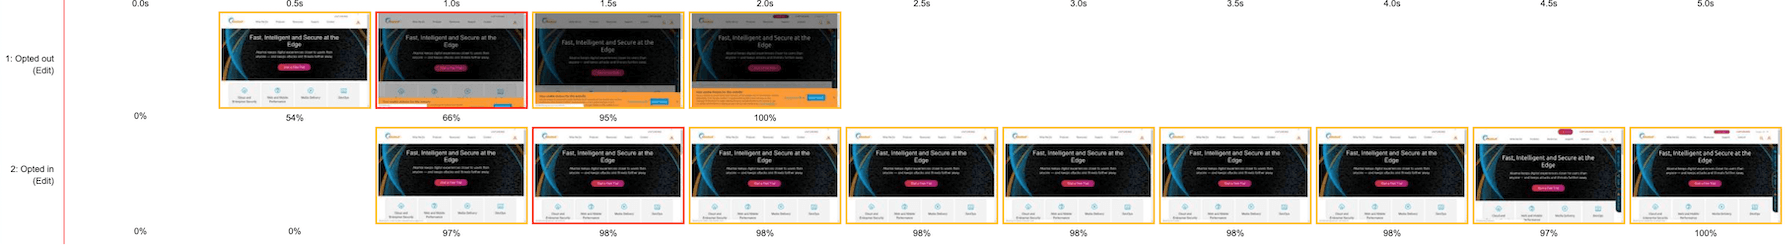 Filmstrip images showing cookie opt-in is slower